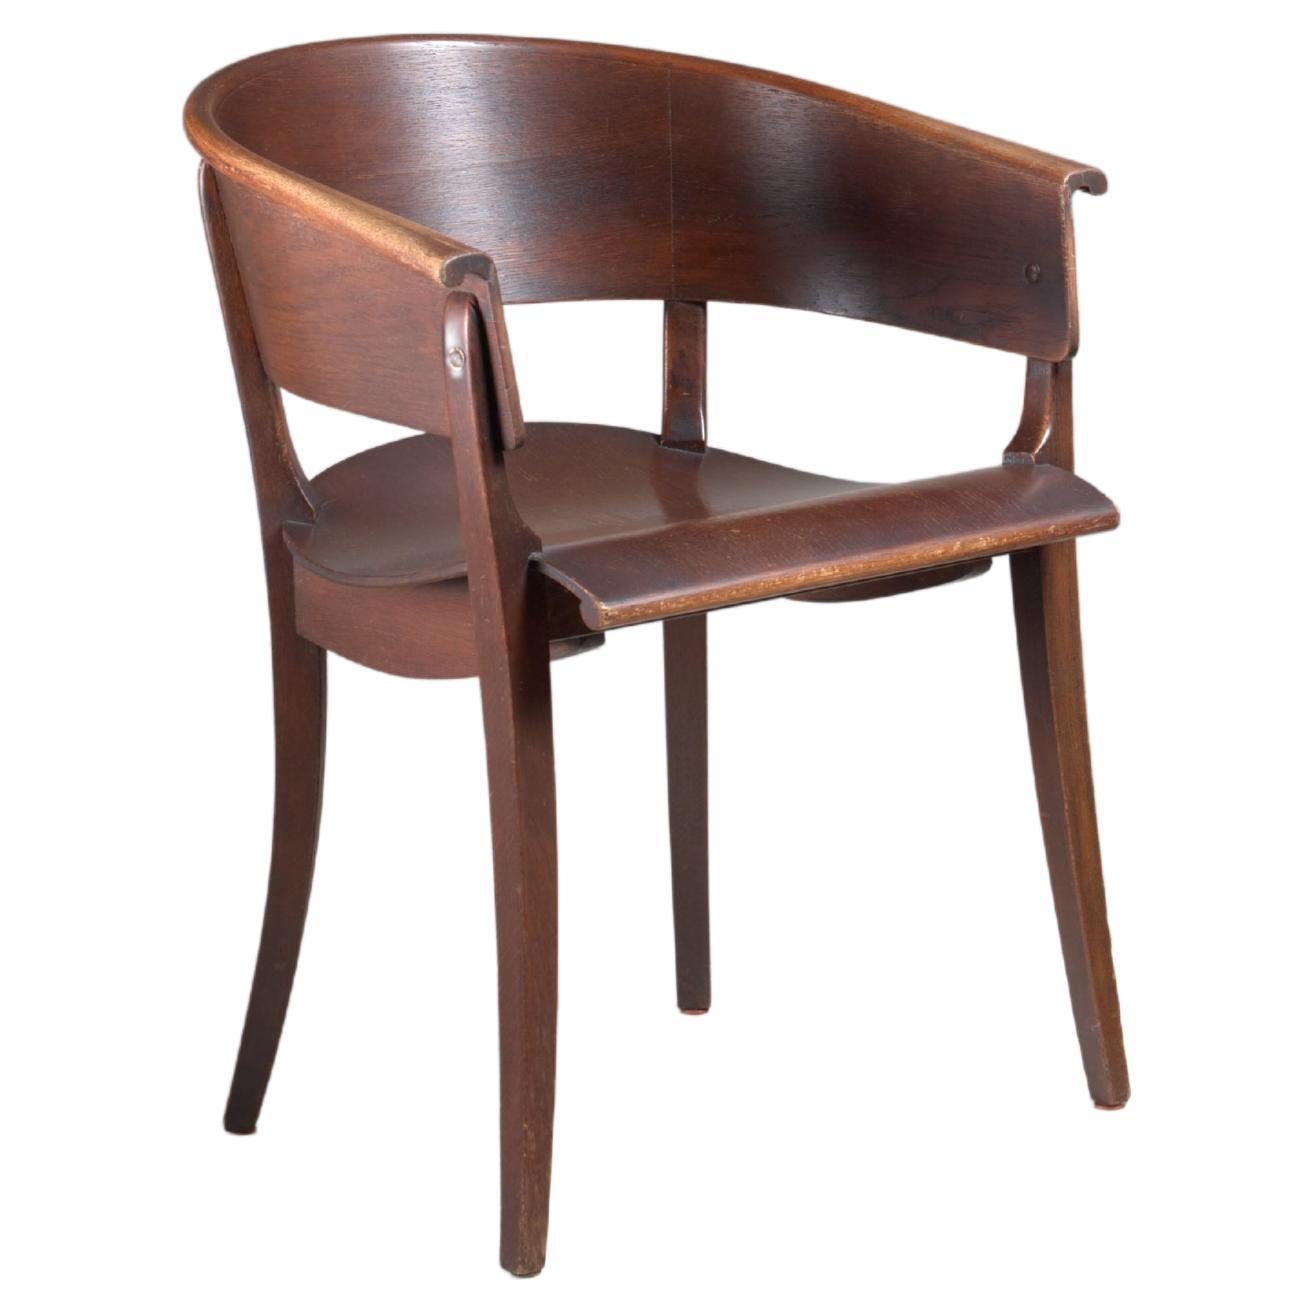 Arthur Rockhausen Bauhaus Style Plywood and Oak Chair, Germany, circa 1928 For Sale